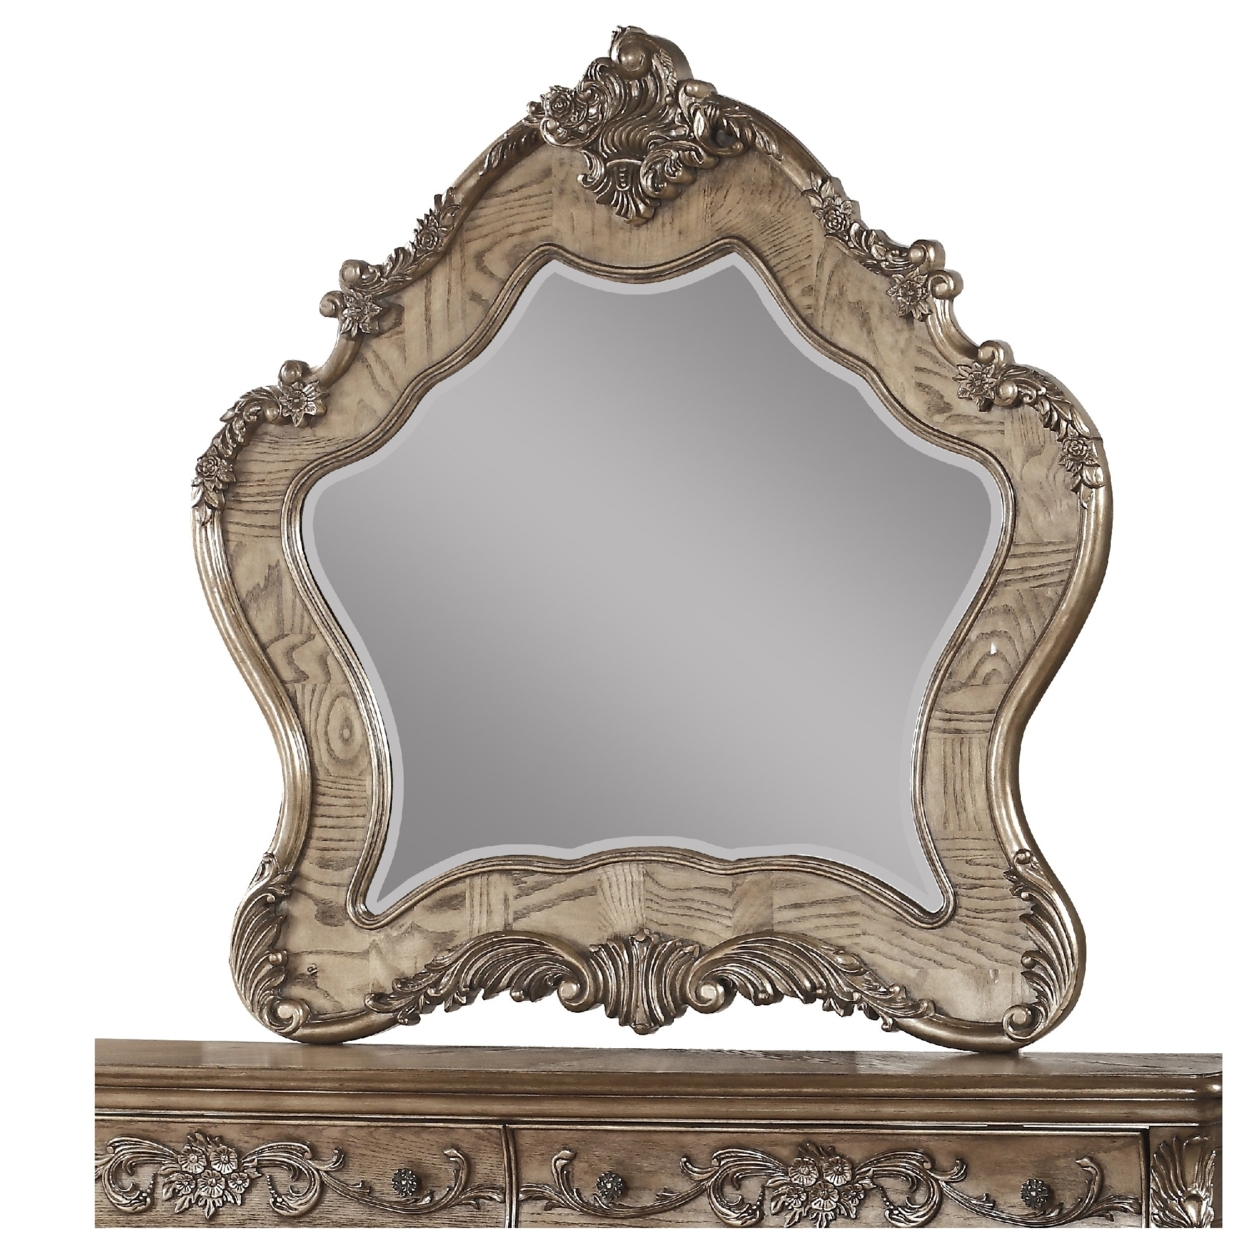 Wooden Mirror With Scrollwork Crown And Trim Details, Brown And Silver- Saltoro Sherpi